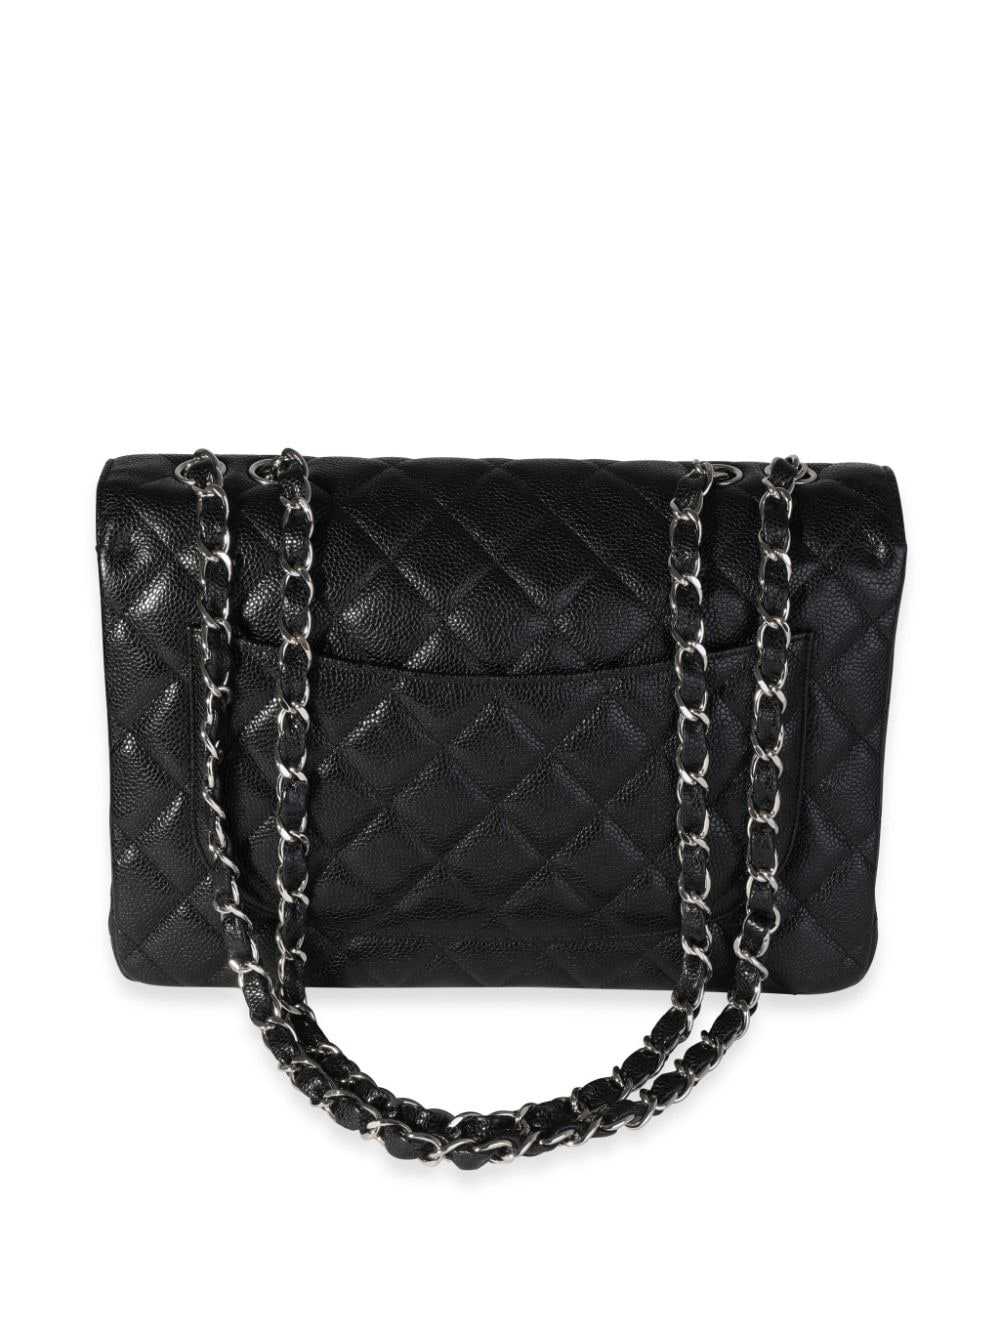 2008 Chanel Classic Jumbo Quilted Patent Leather Rare… - Gem